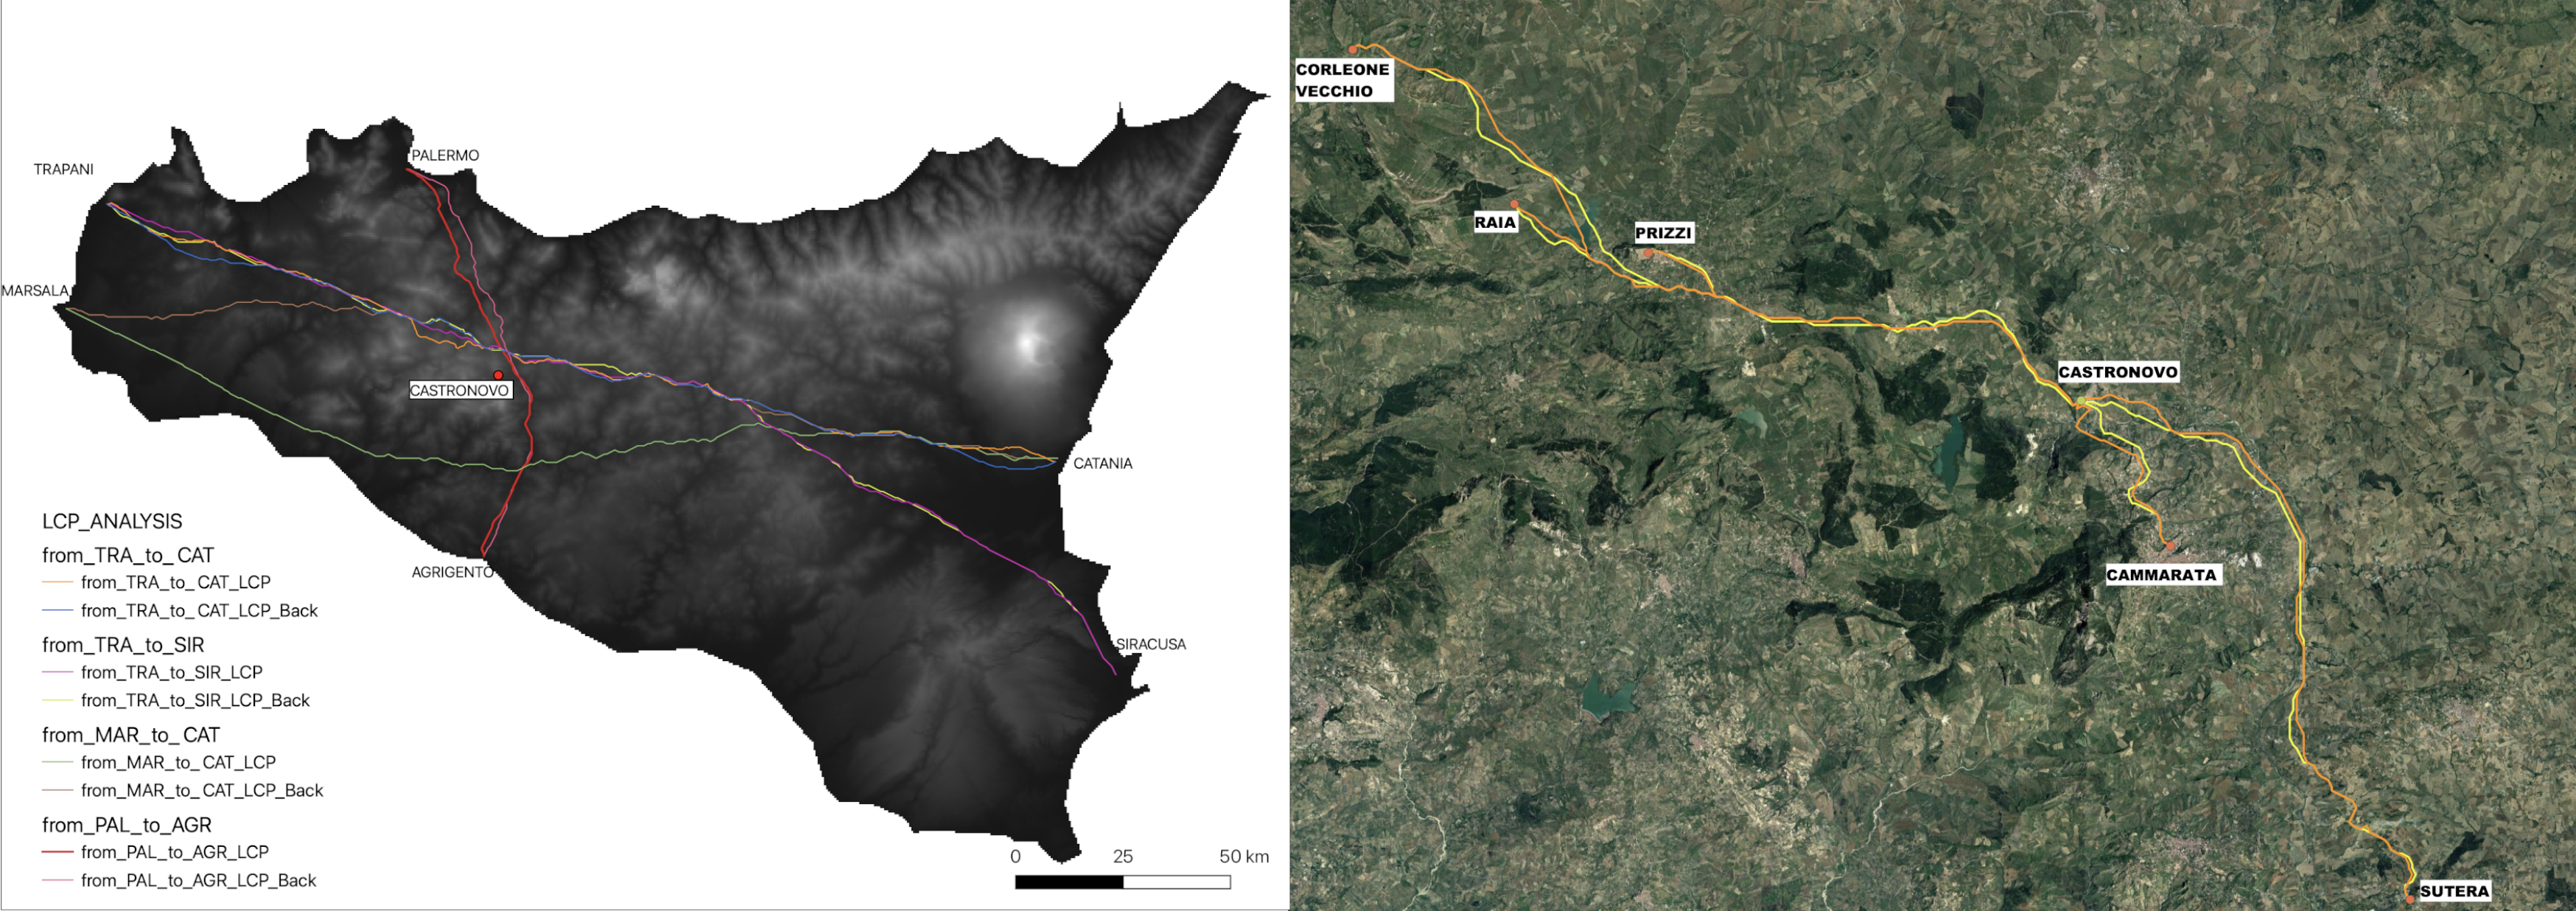 From the Itinerarium Antonini and al-Idrisi to the movecost plug-in: study of the viability in the Castronovo di Sicilia area by comparing traditional sources and least-cost path analysis